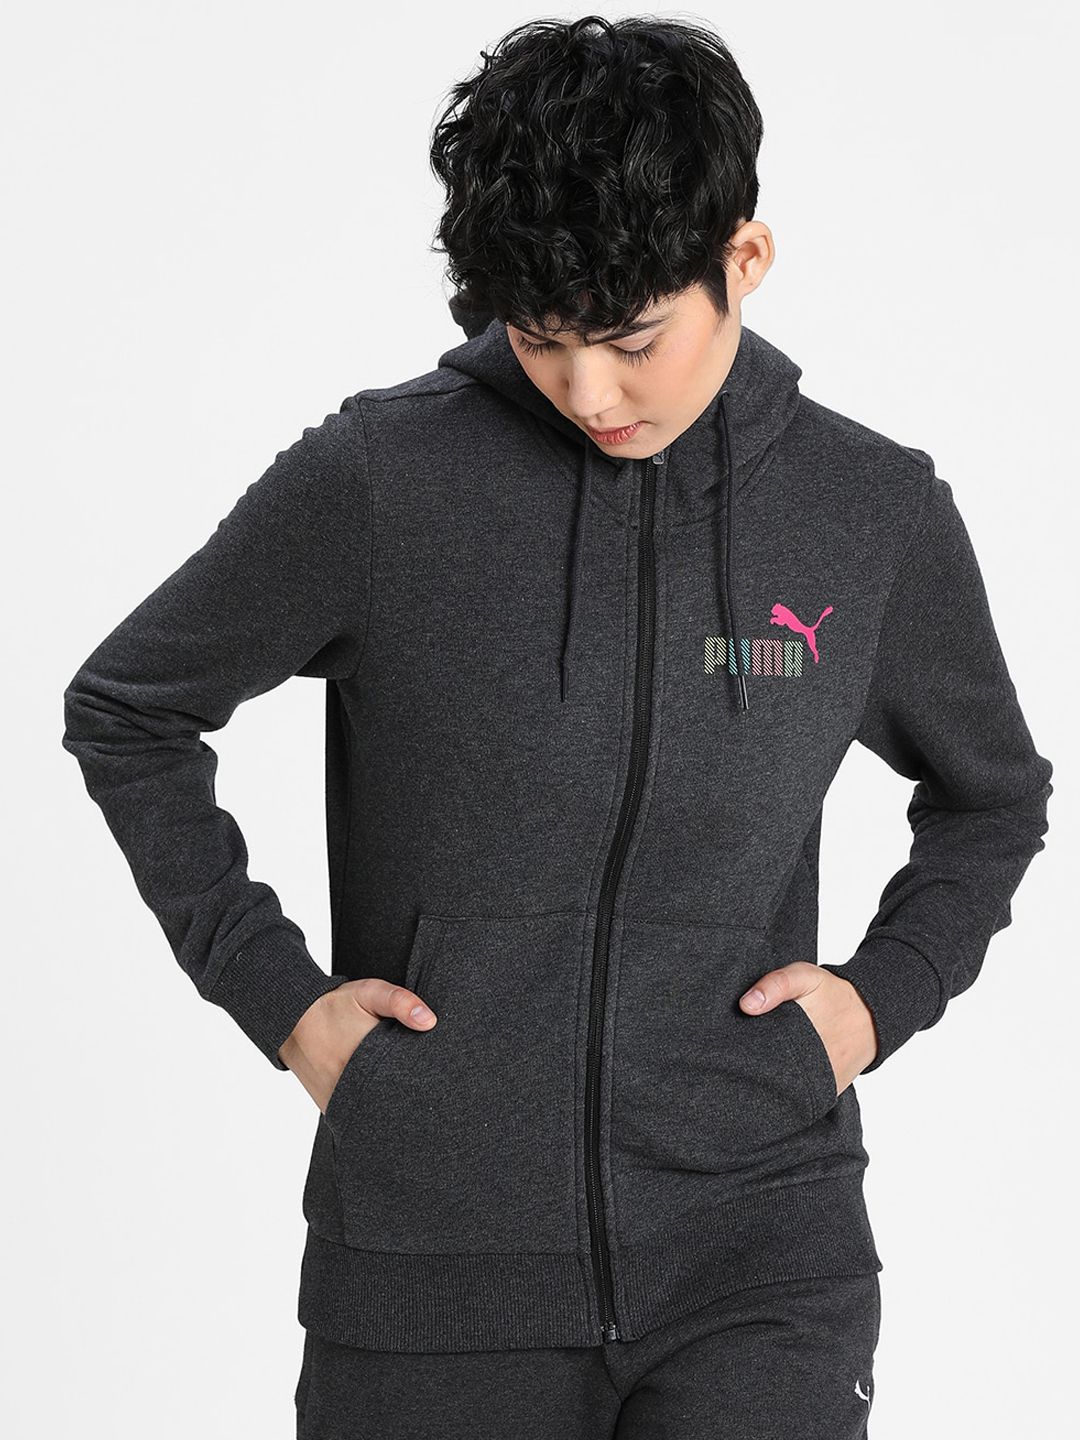 Puma Women Grey Solid Hooded Sporty Jacket Price in India